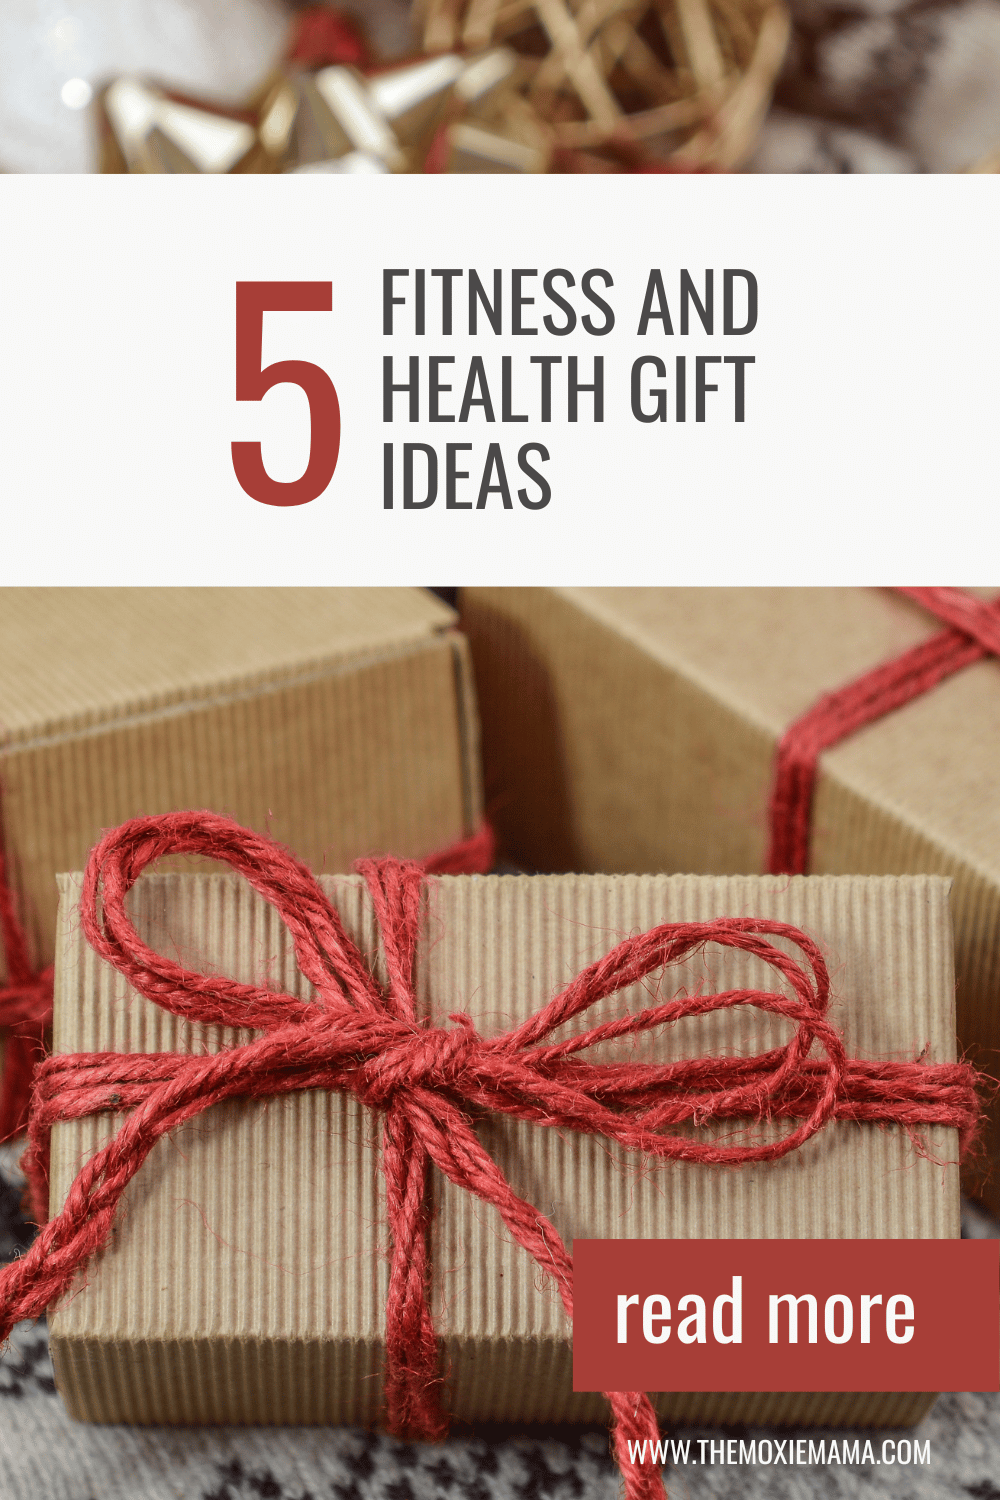 5 unique health and fitness gifts for the fitness lover in your life